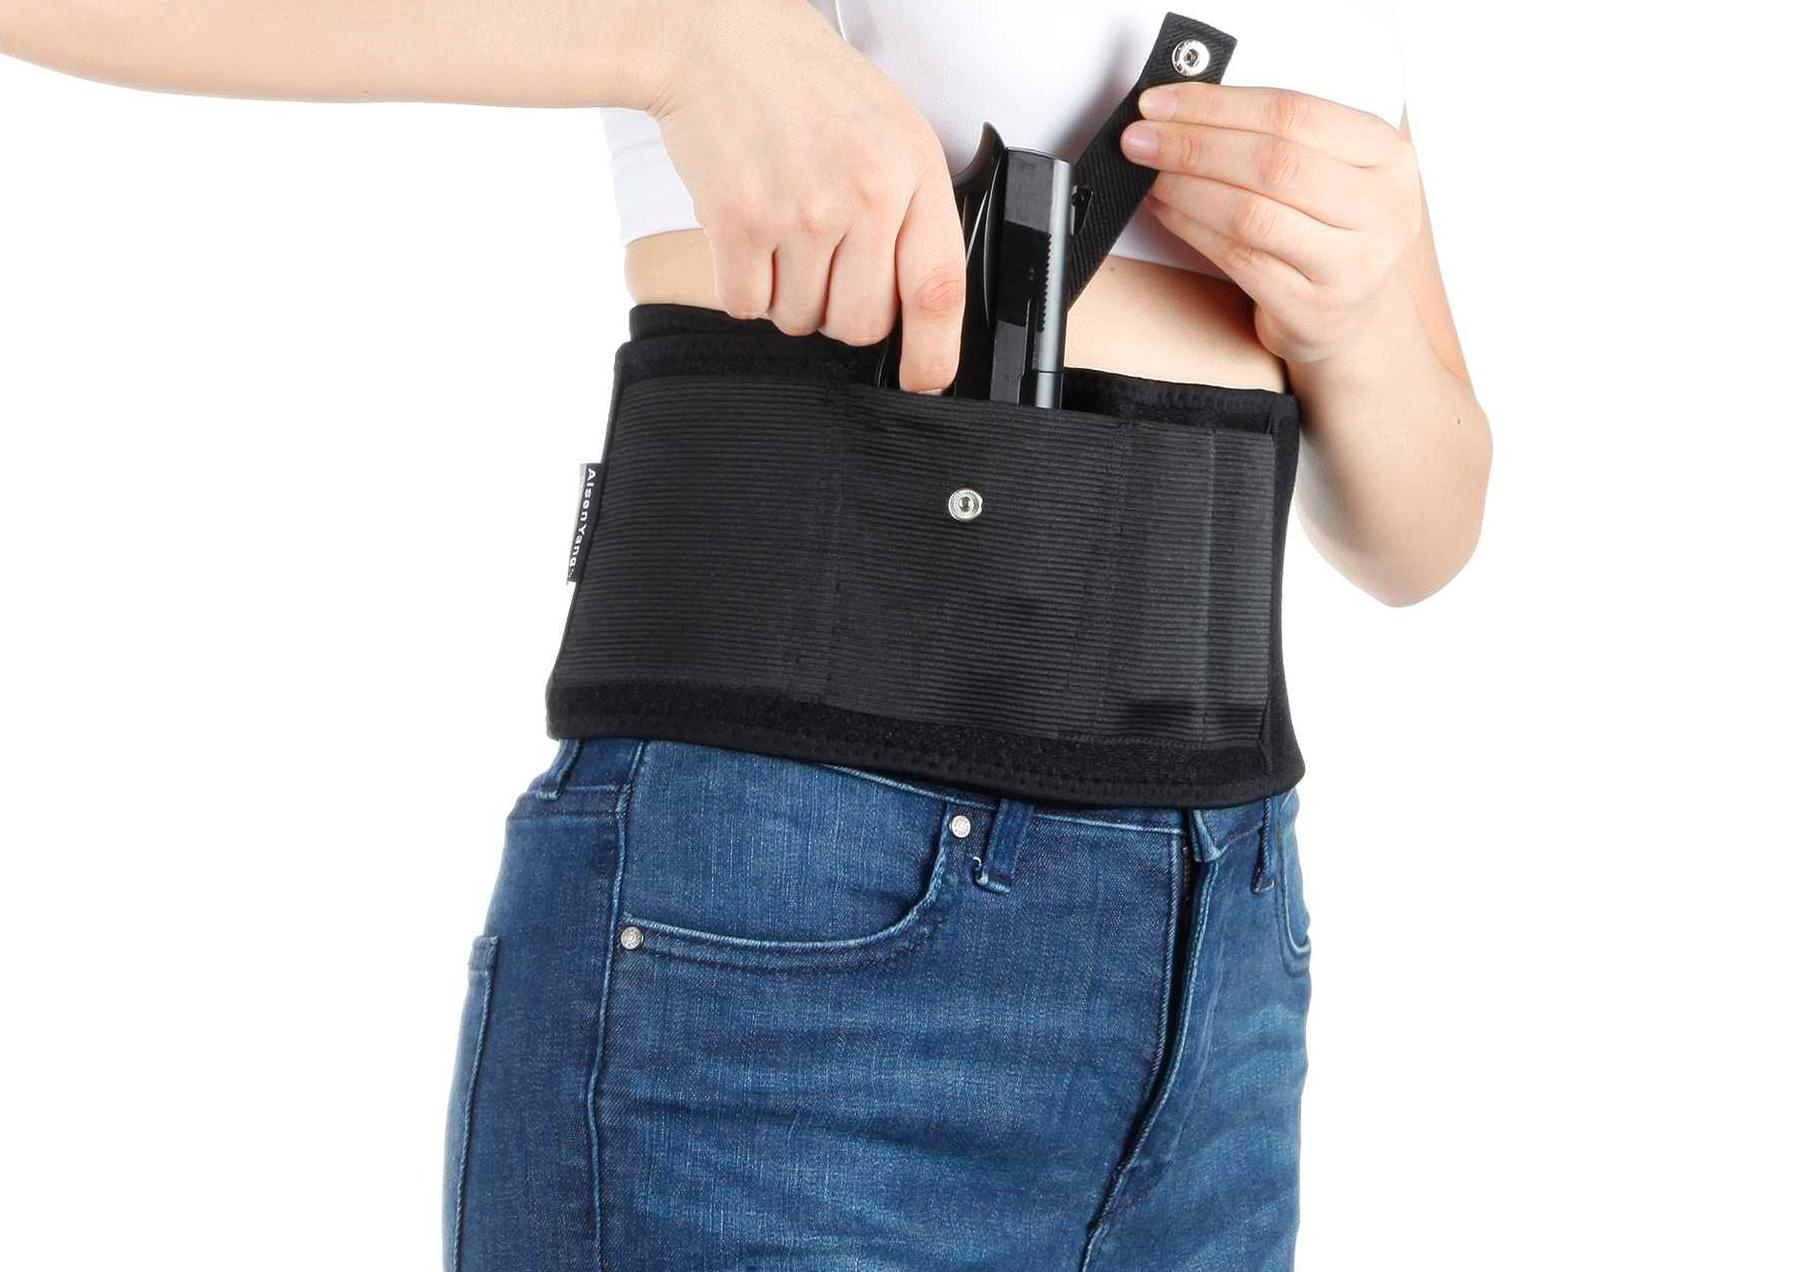 http://hanks-holster-review.com/wp-content/uploads/2017/08/Female-Belly-Holster-Concealed-Carry.png